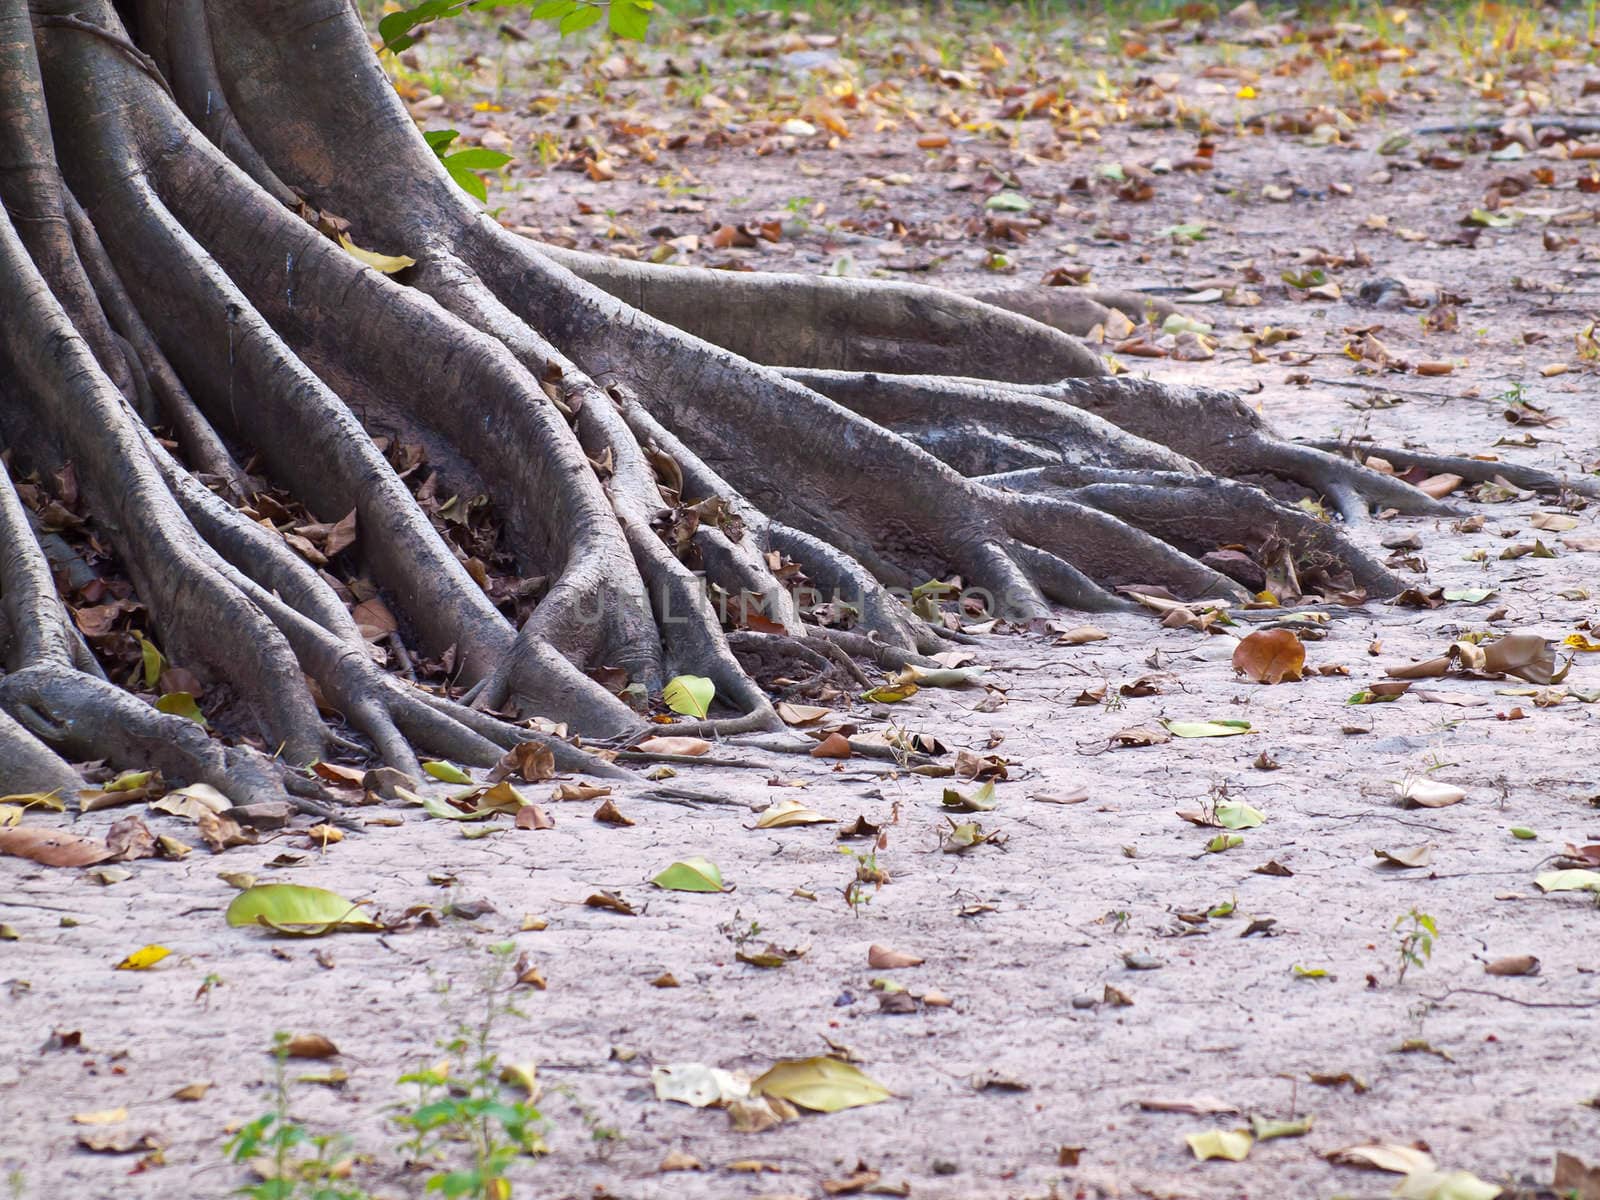 Mass root system above the dry ground